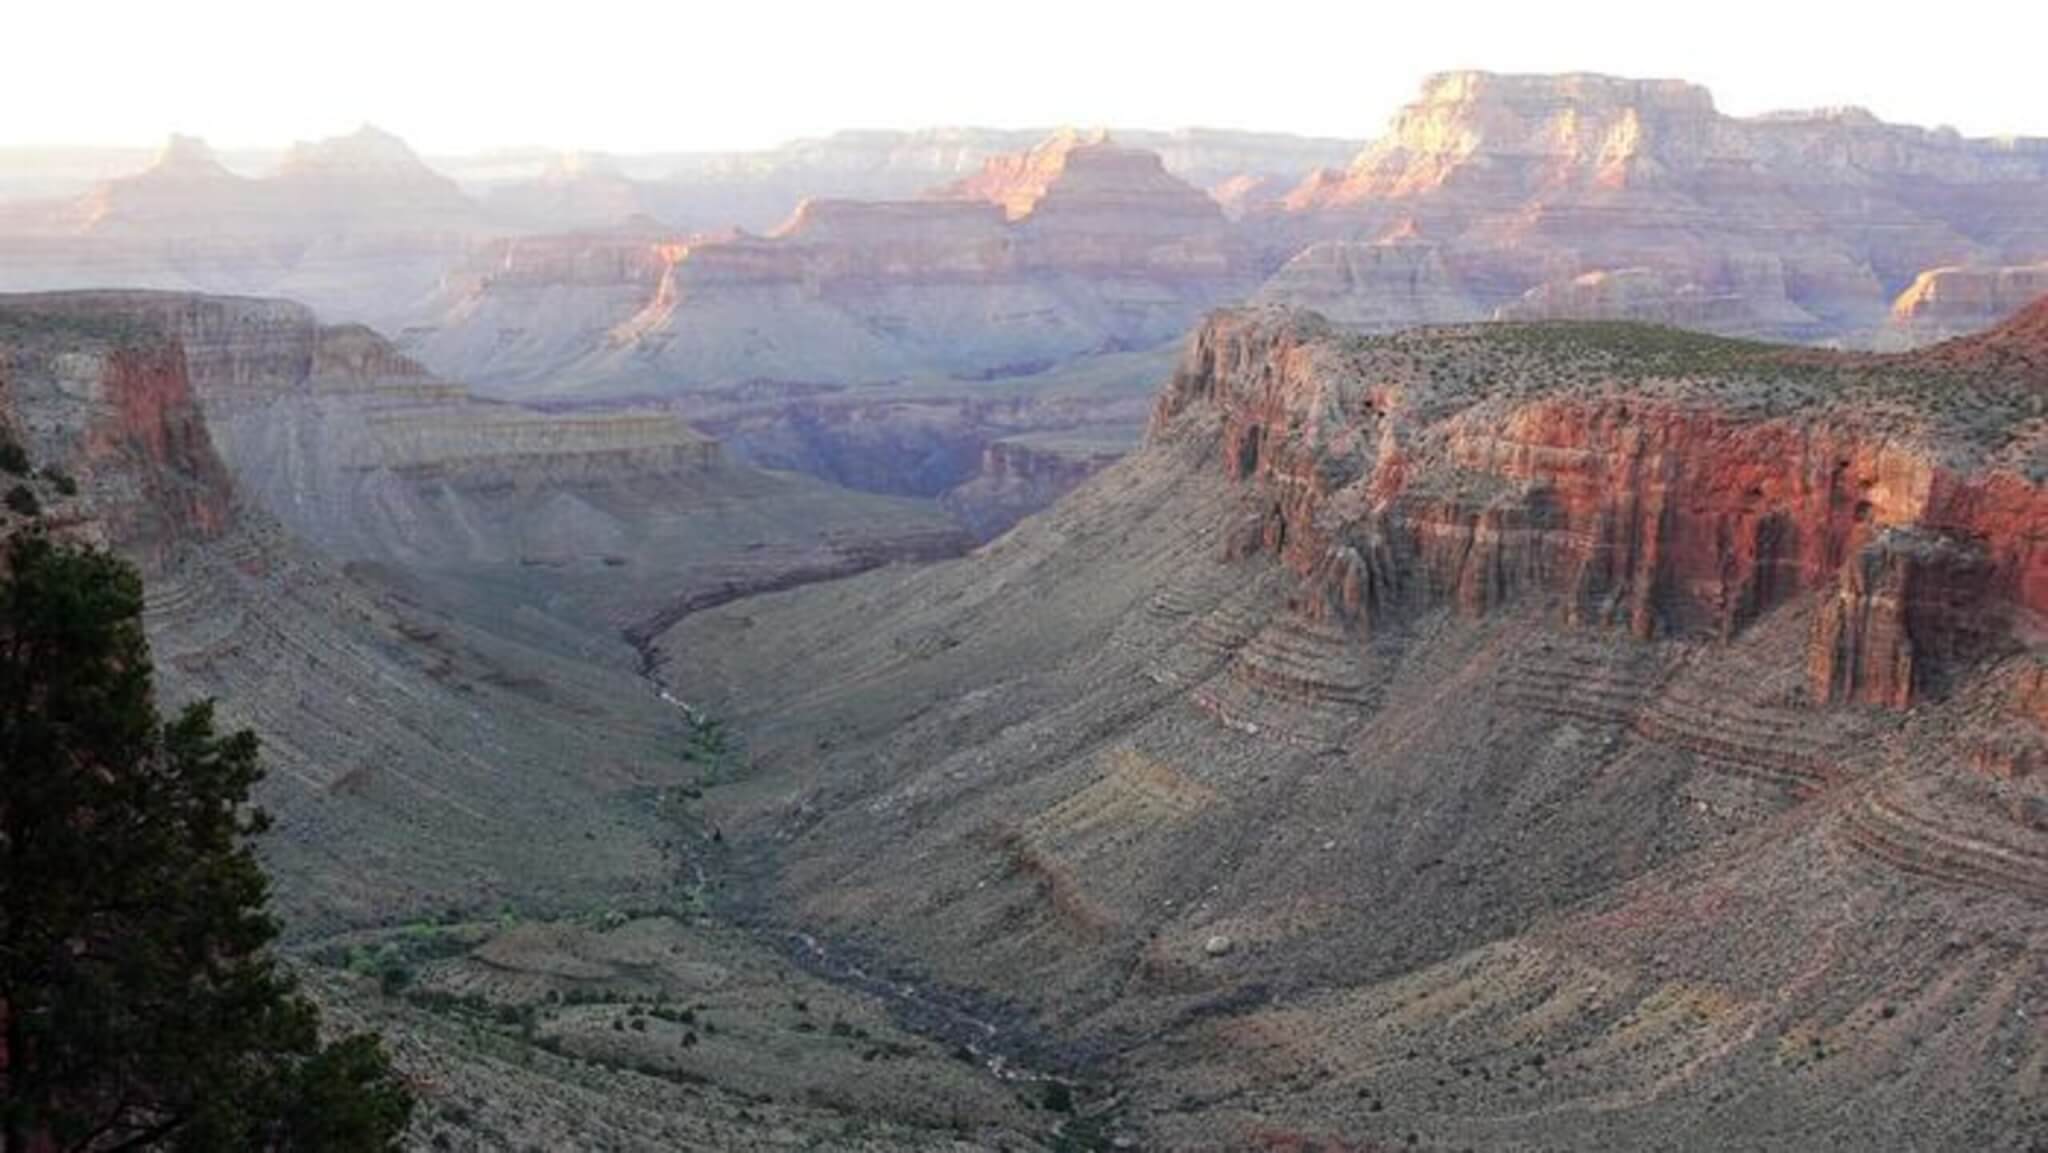 The stalagmite used in the research study came from this area of the Grand Canyon